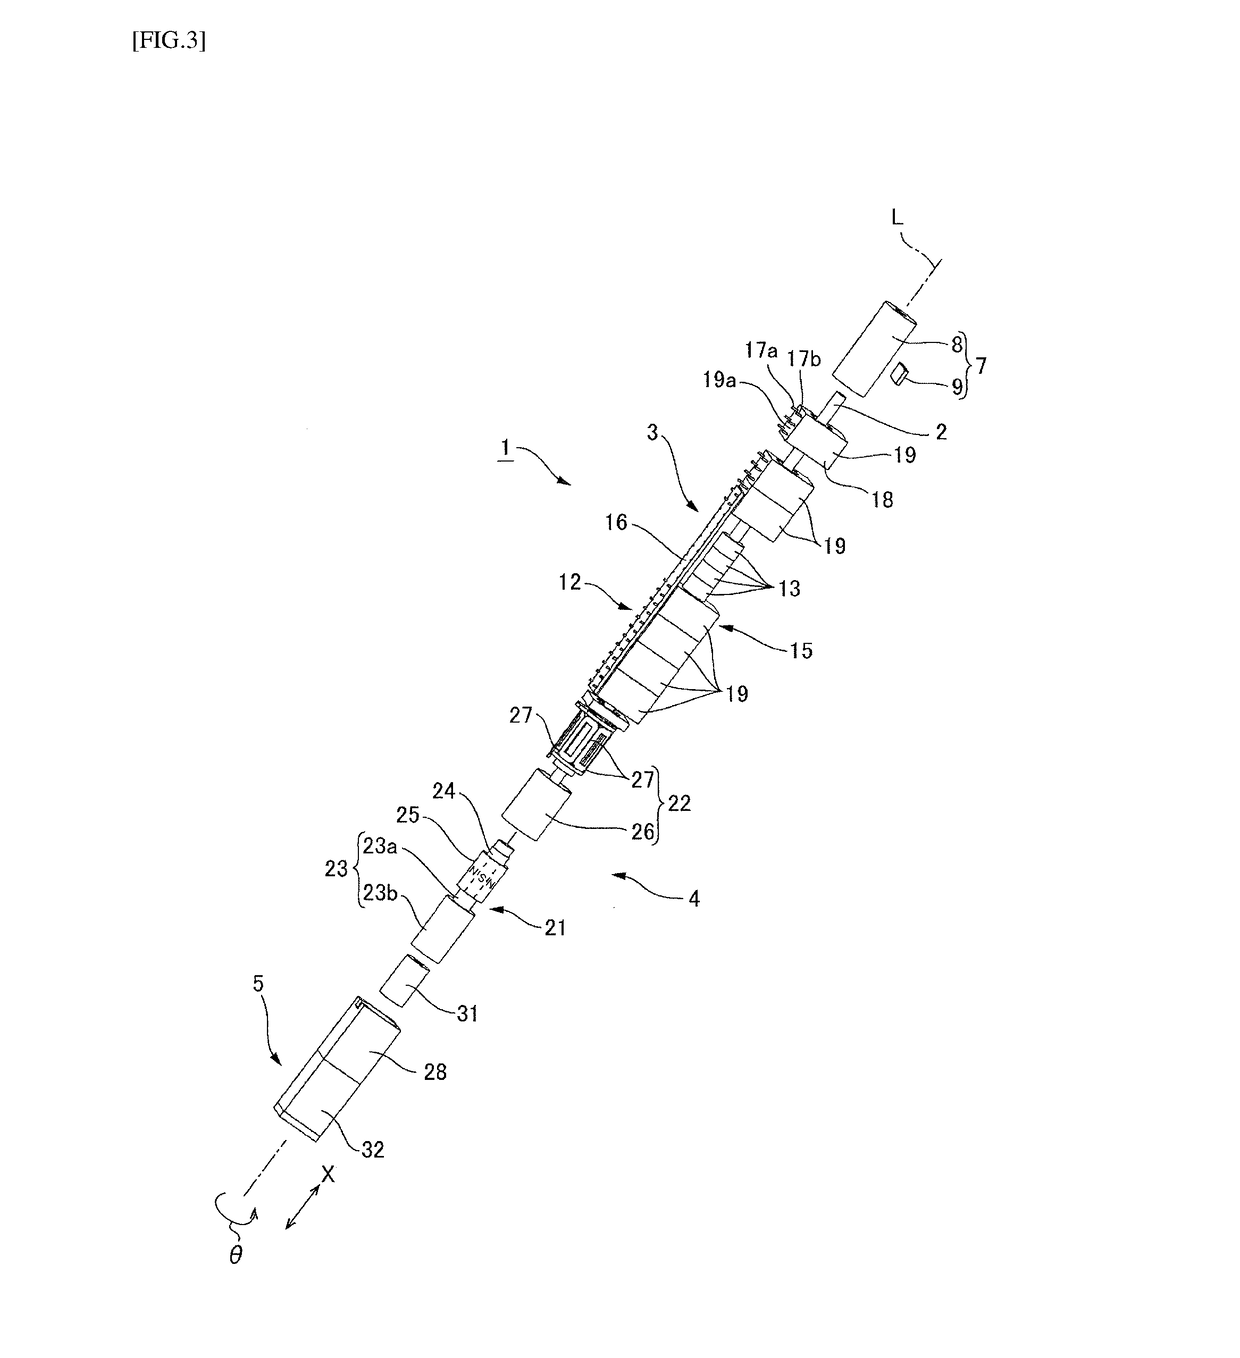 Linear motion and rotation drive apparatus